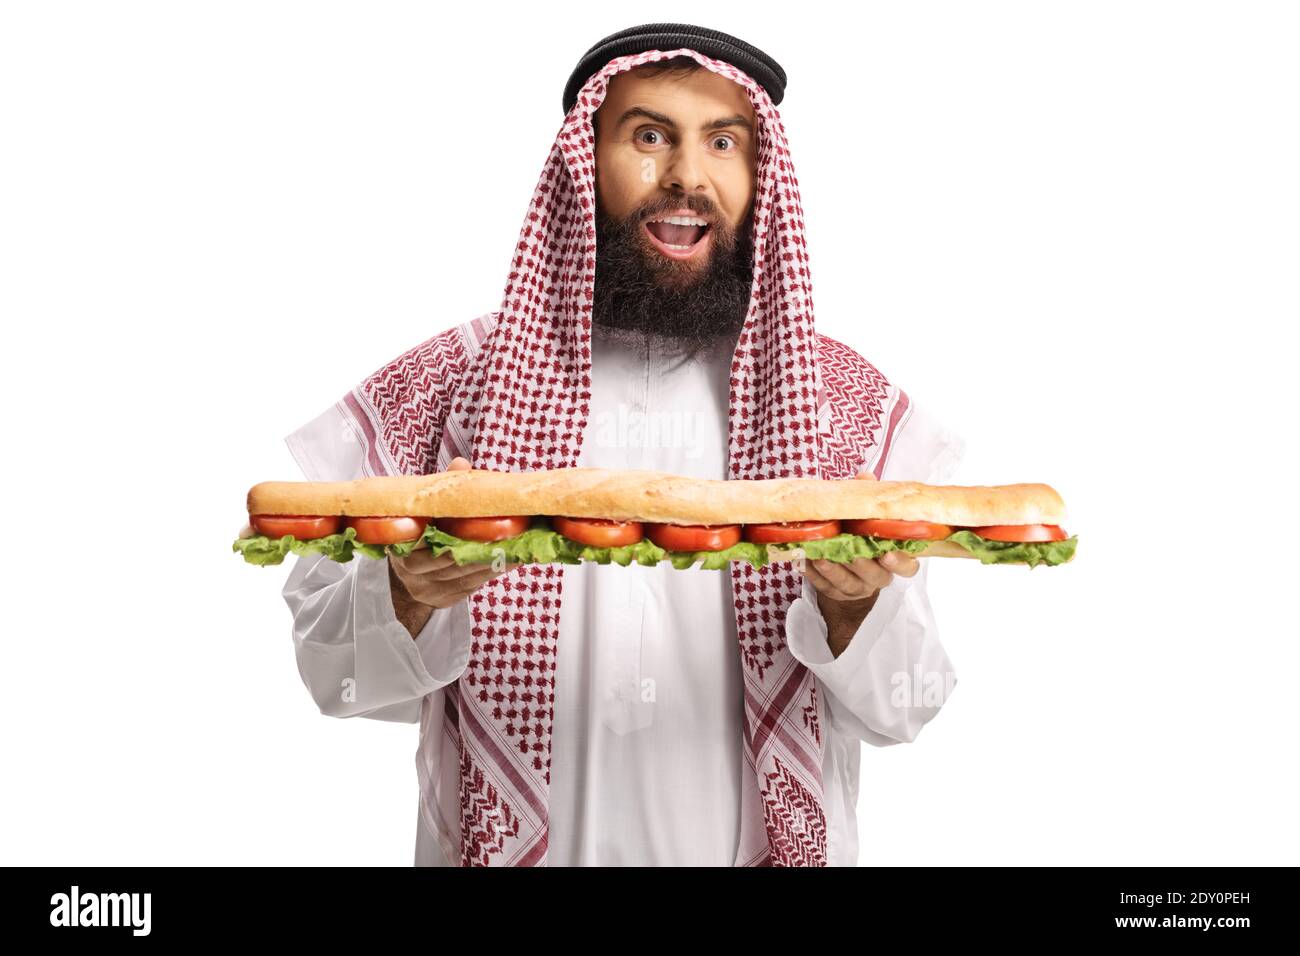 Saudi arab man holding a tasty long sandwich in a baguette isolated on white background Stock Photo